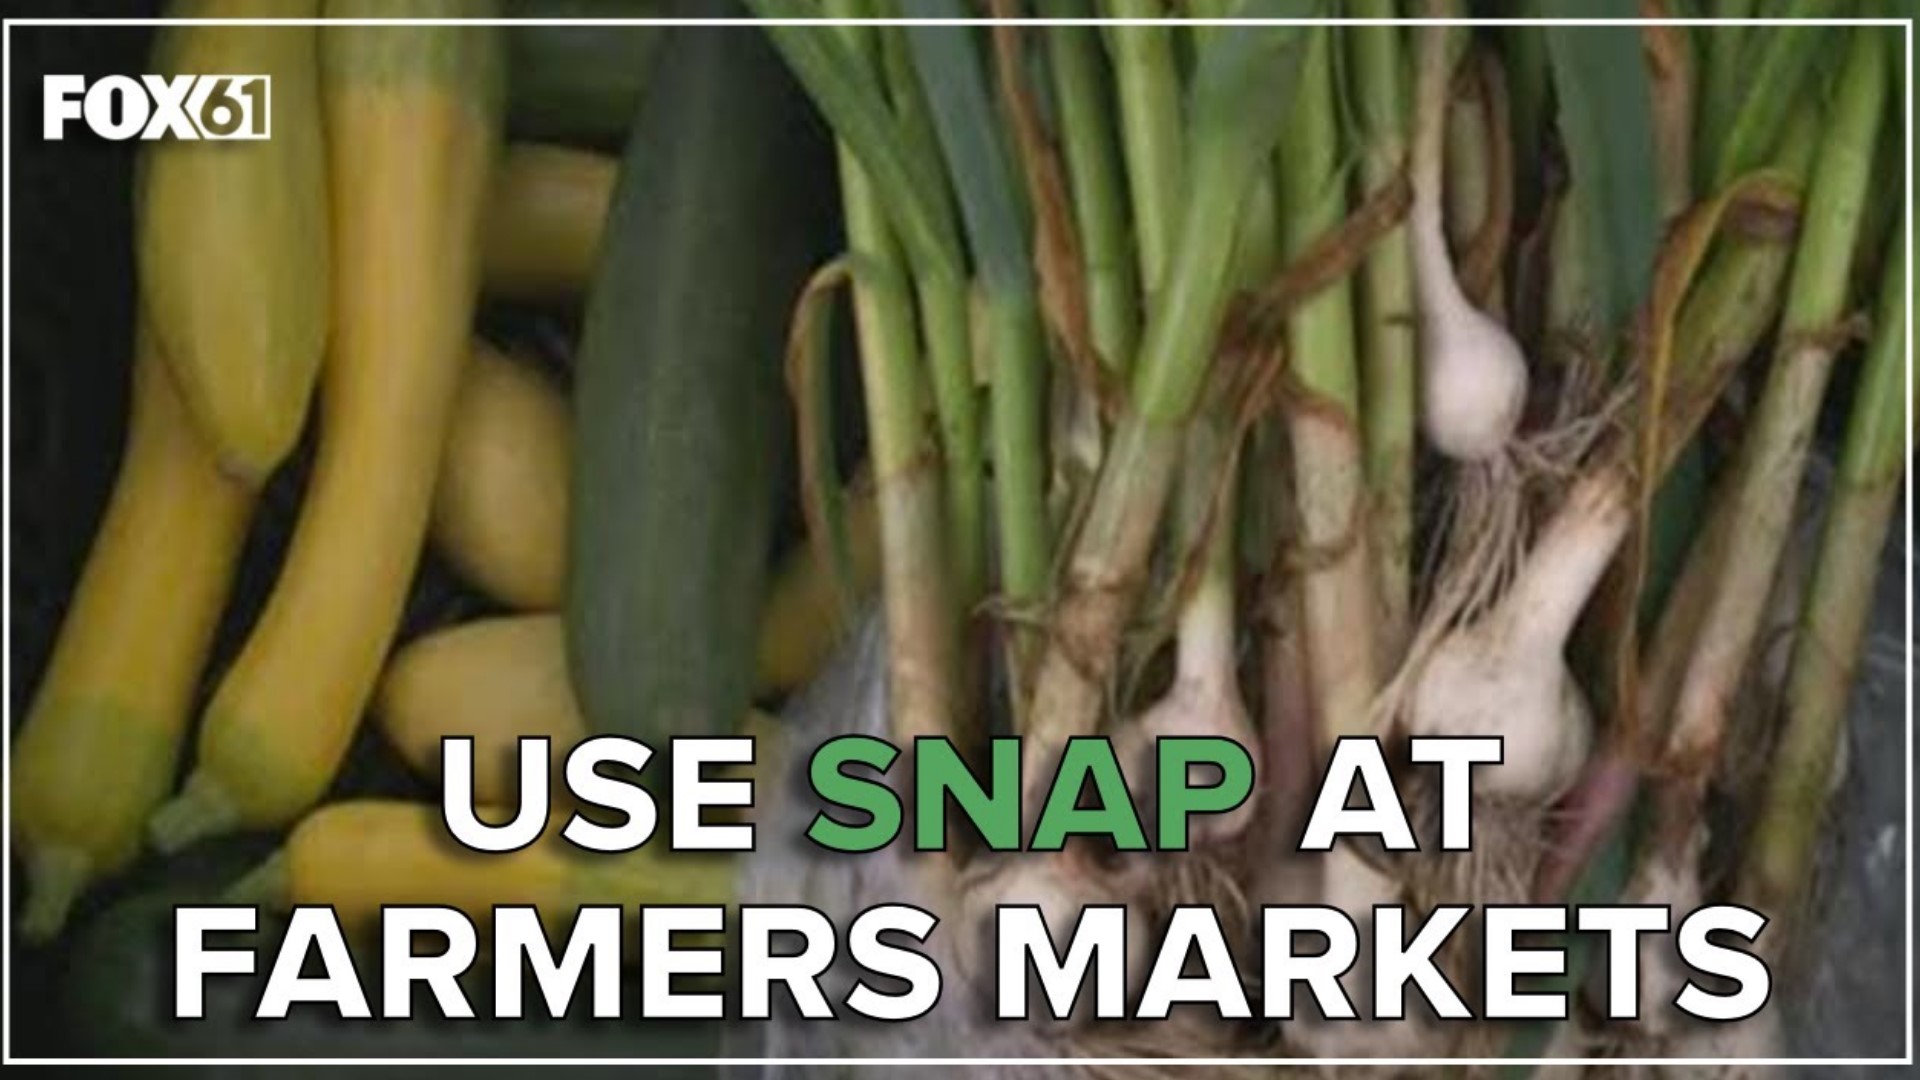 SNAP households can use their benefits at every grocery store, but getting more people out to local farmers' markets is important for communities across the state.